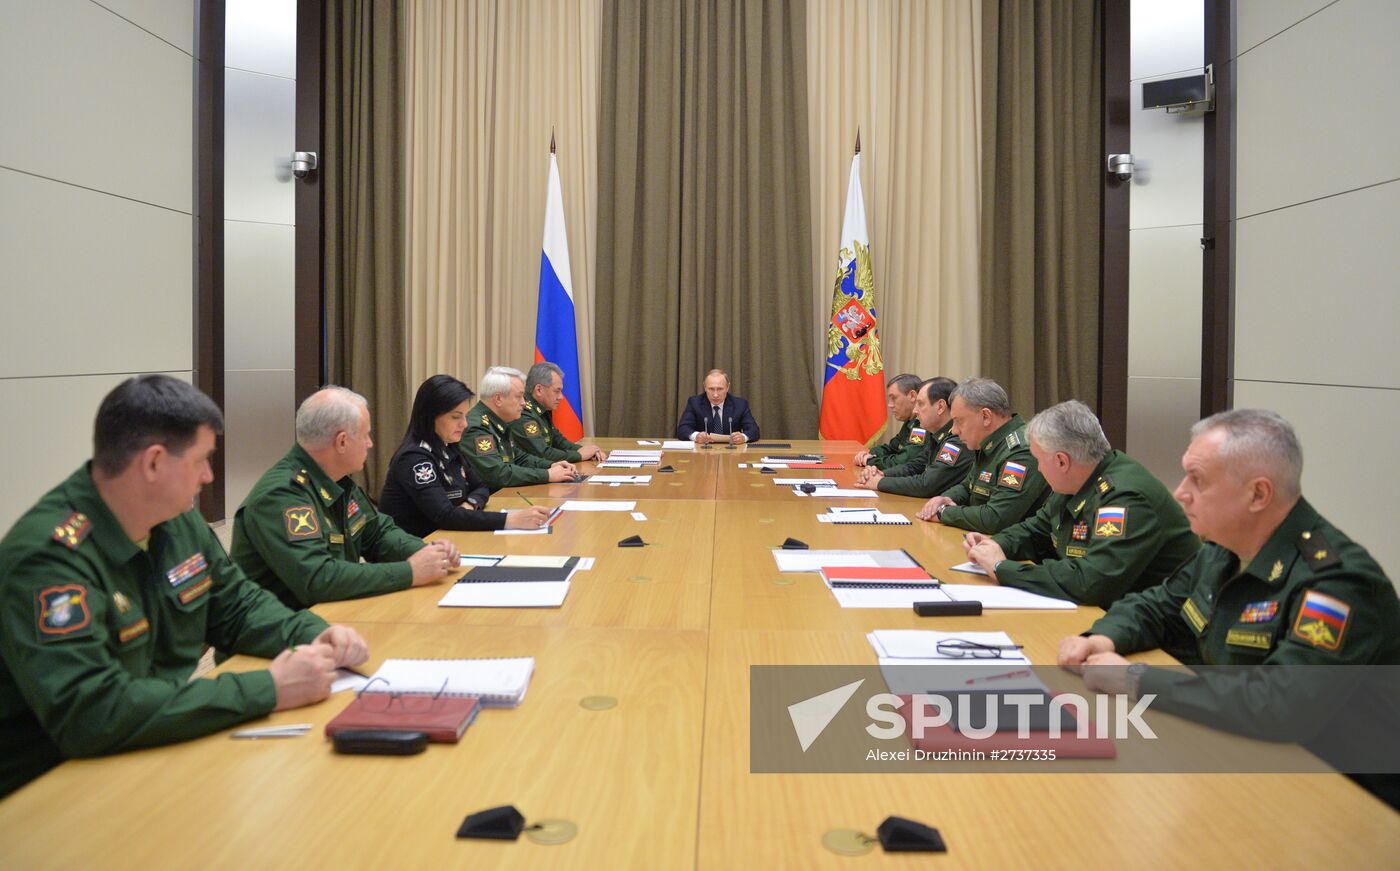 President Putin chairs meeting on Russian armed forces development